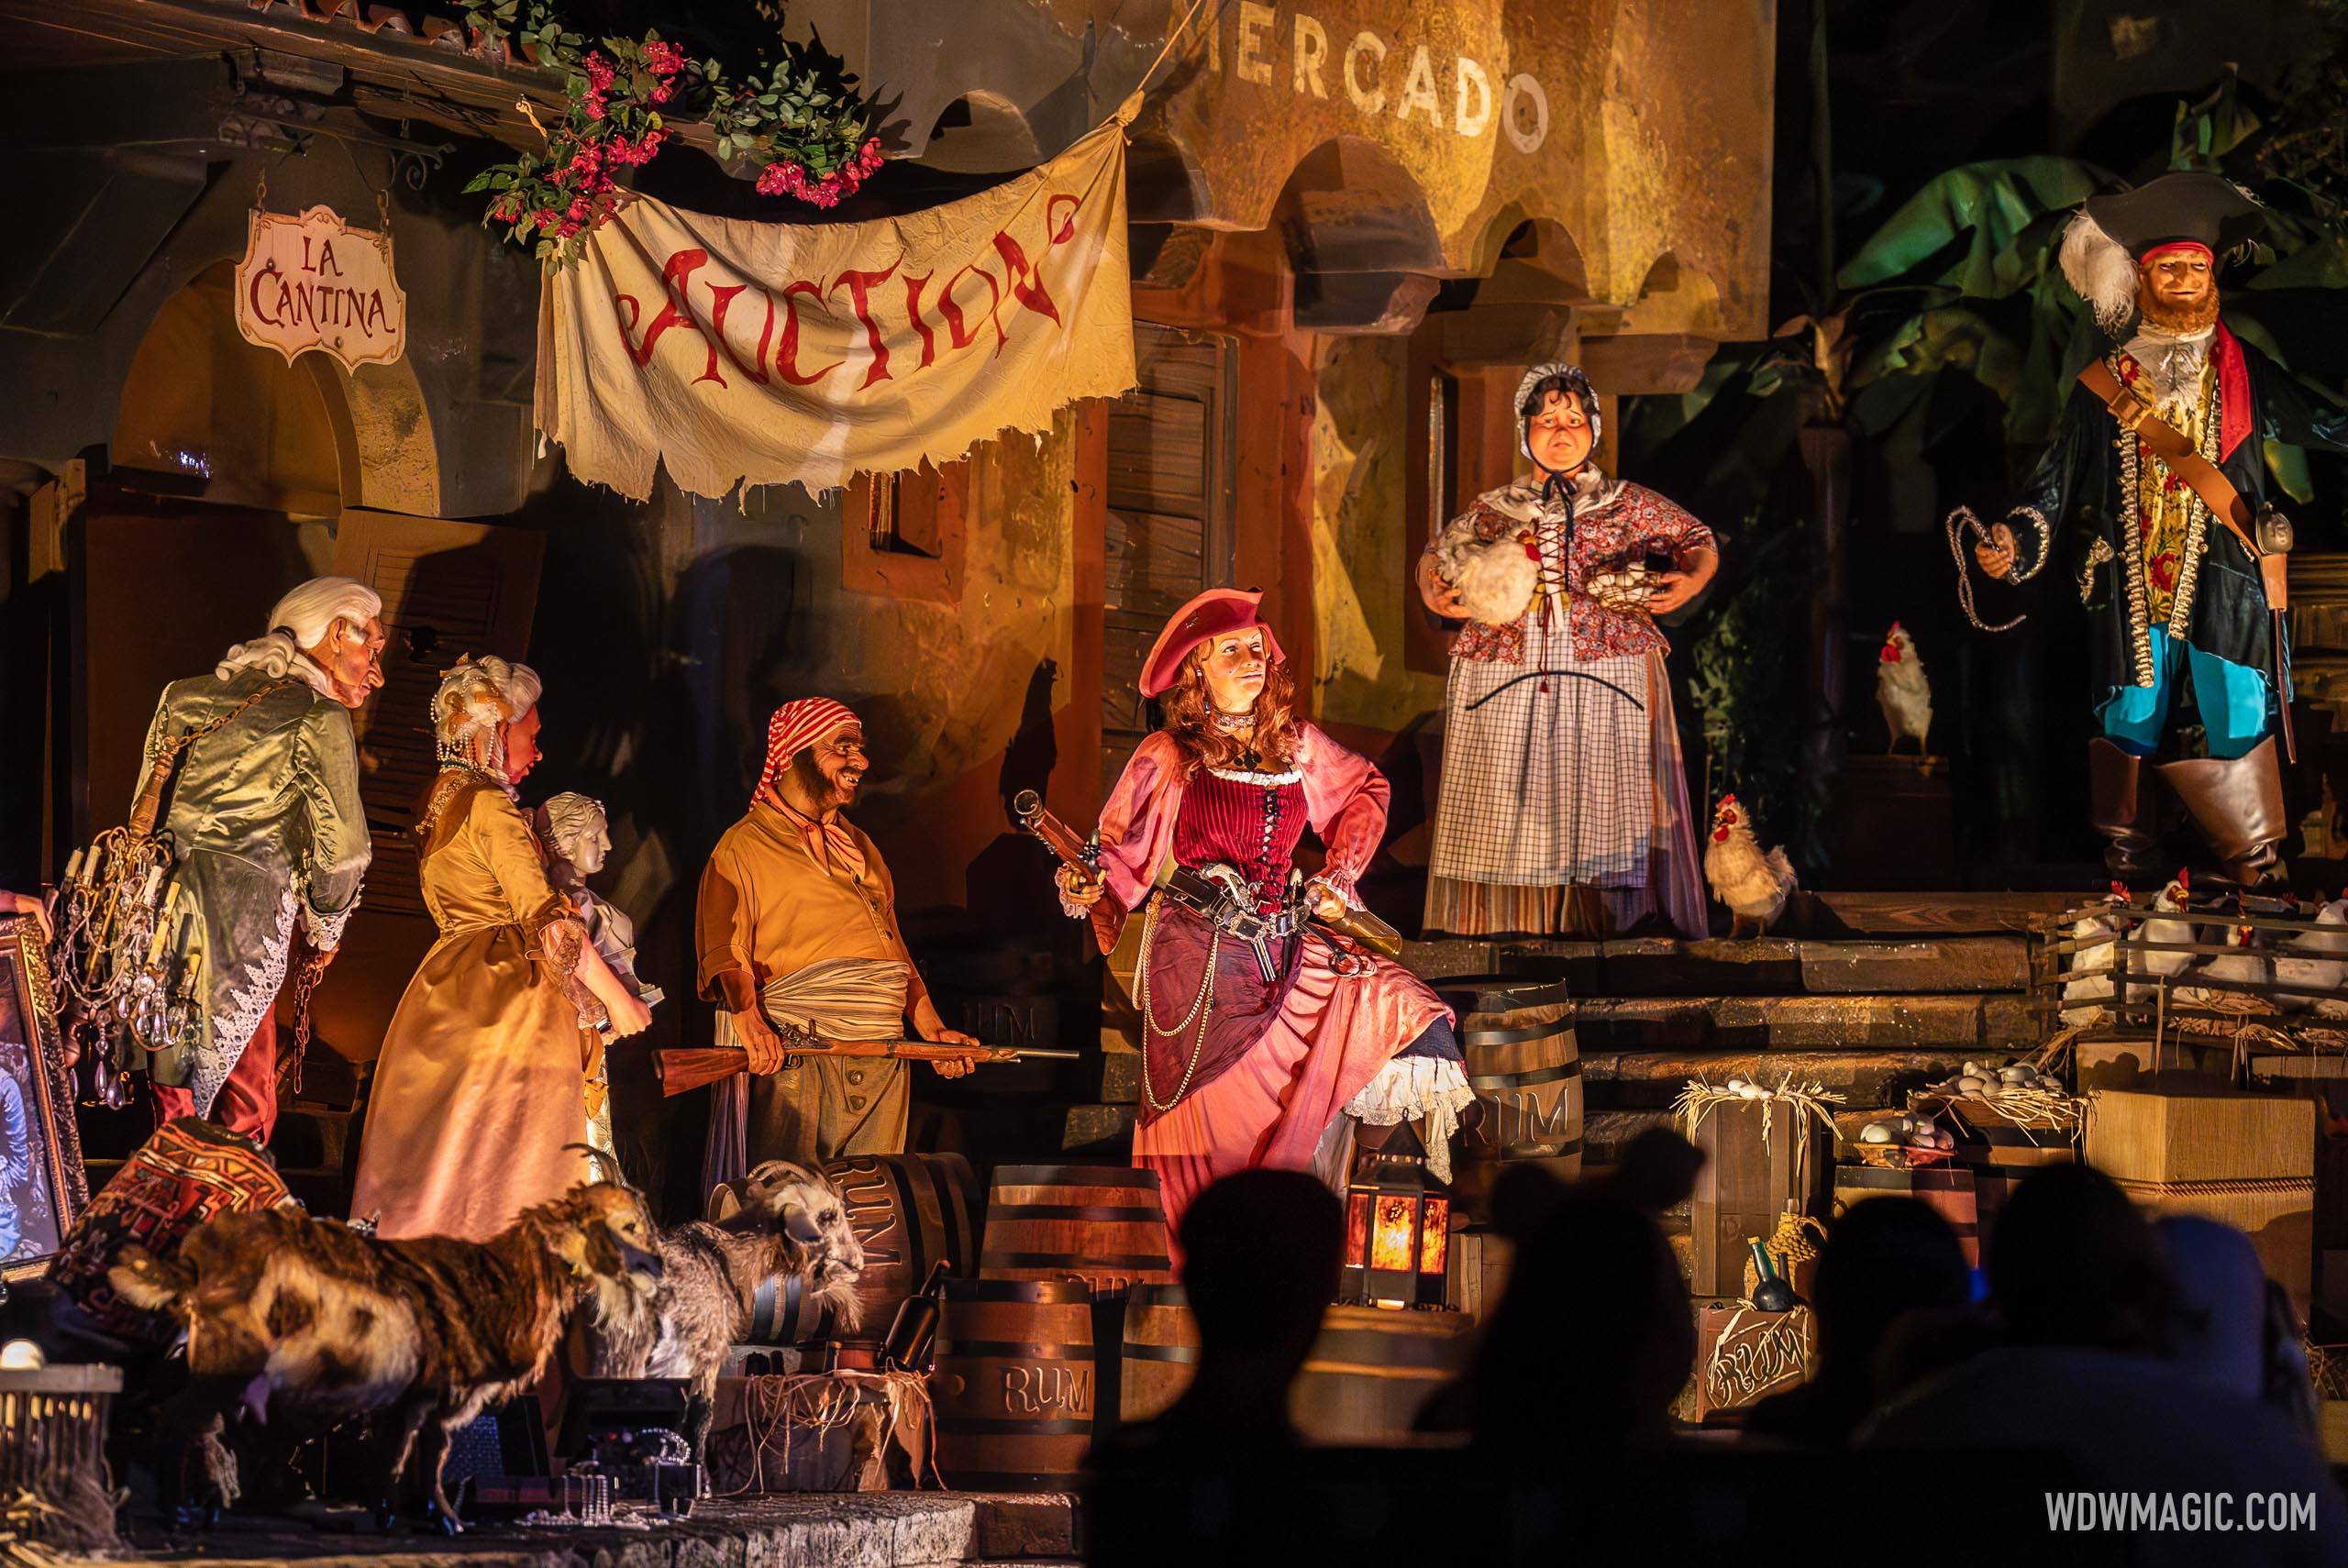 Pirates of the Caribbean reopens after phase 1